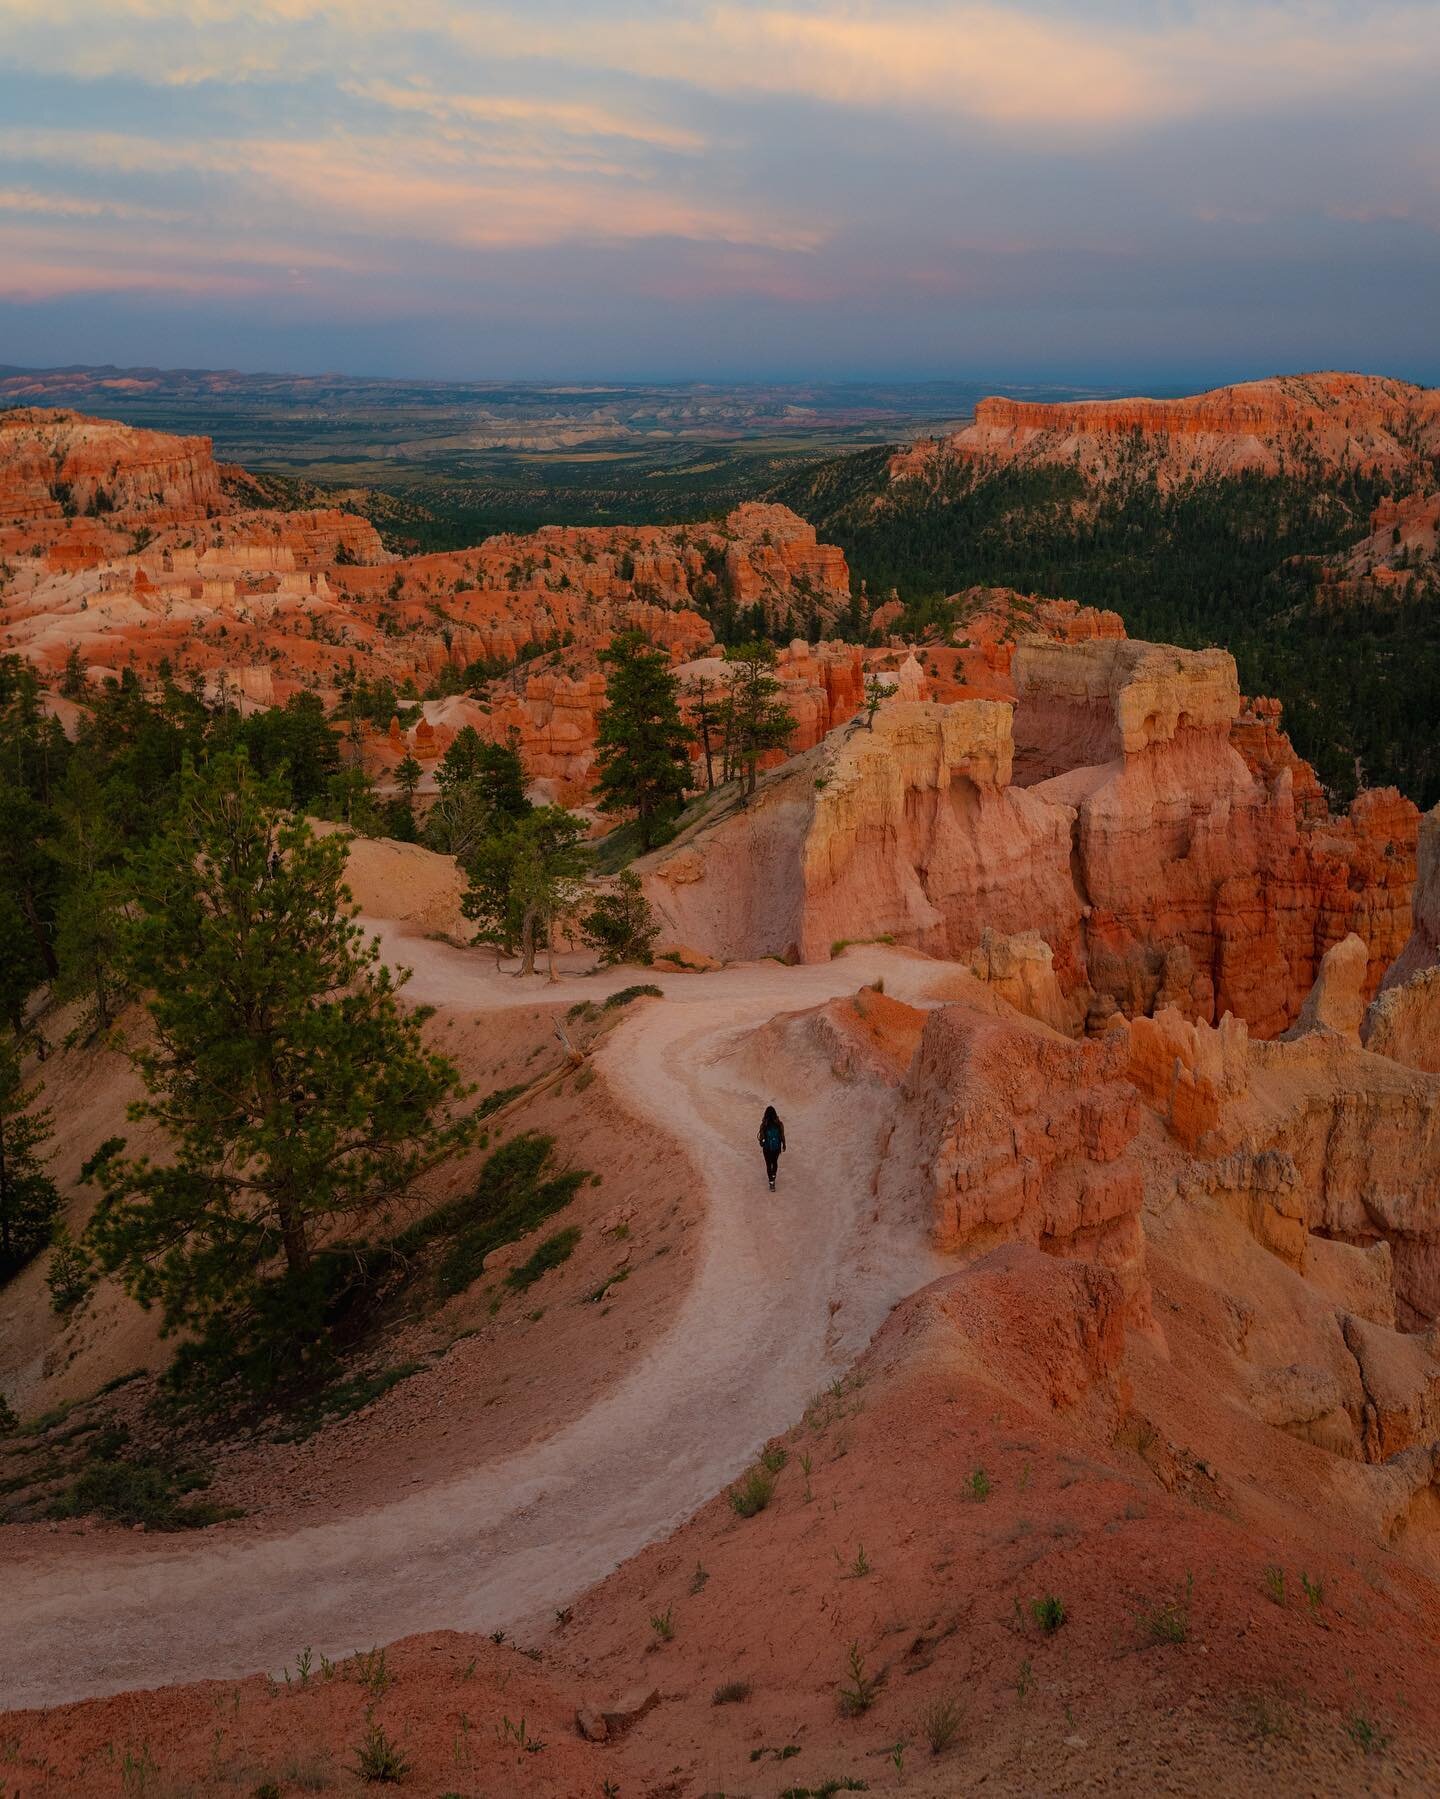 Bryce Canyon at sunset. 

Catch more of my nature + landscape work on my 2nd page @salstouch.jpg 🤘🏼